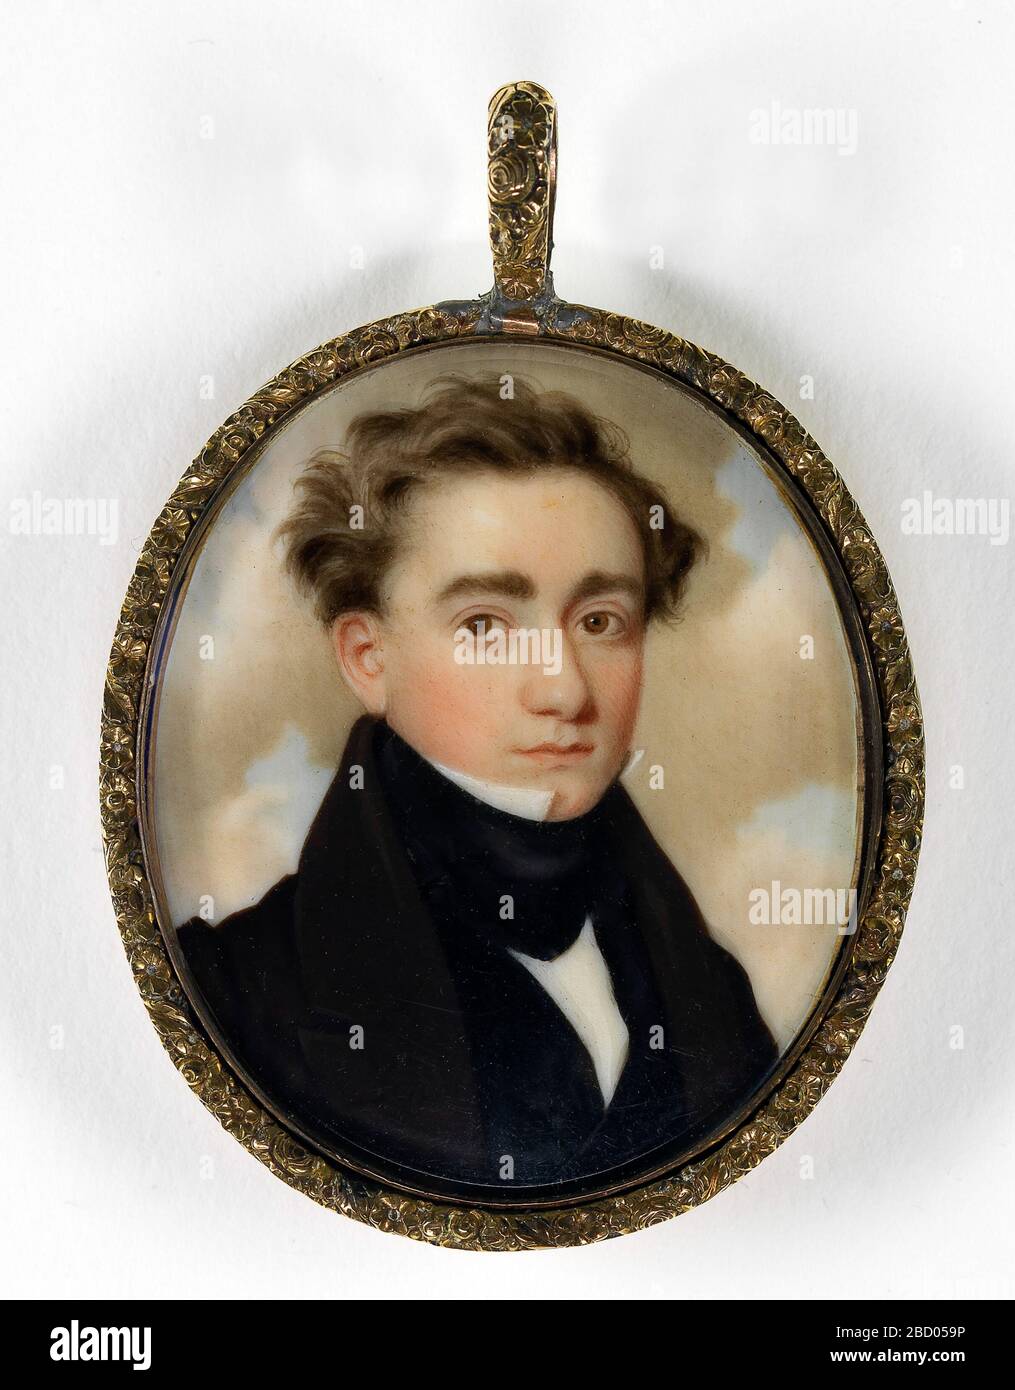 Portrait of a Gentleman. This miniature was painted while John Wood Dodge was living in New York. The unknown gentleman wears what appears to be a tailcoat, with a fashionably high collar and gilt buttons. Stock Photo